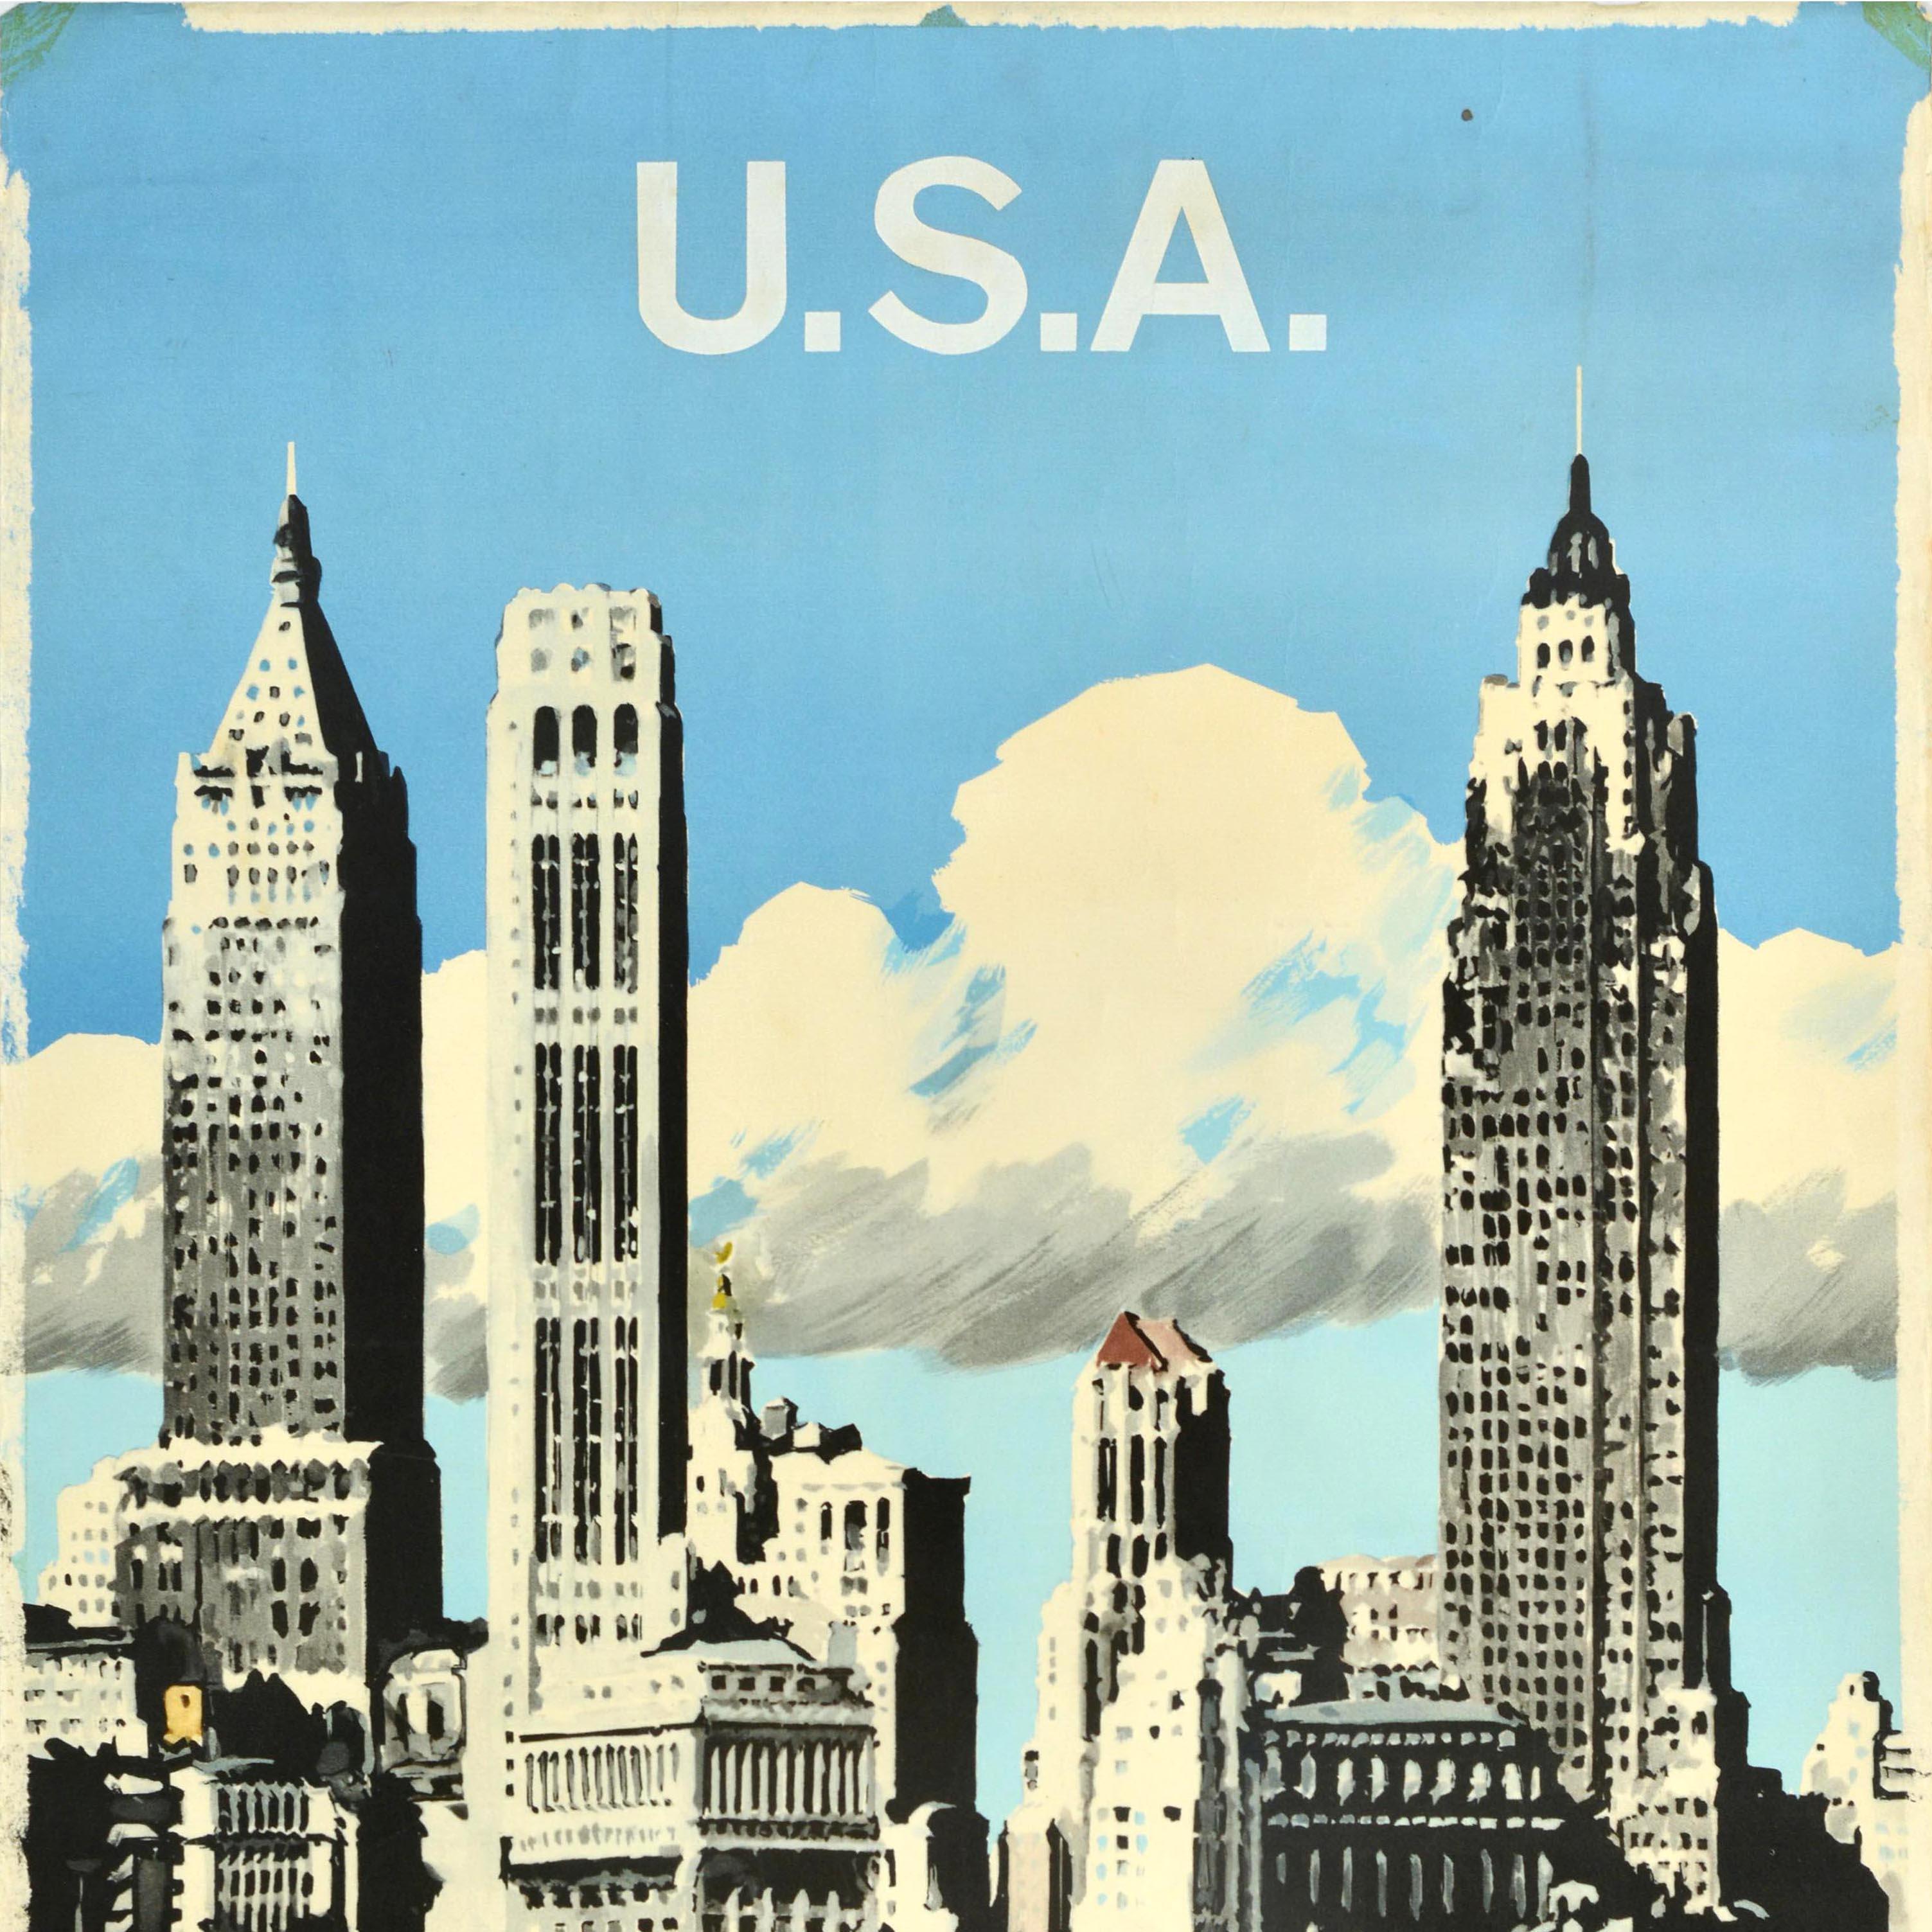 Original vintage travel advertising poster for the USA by Aer Lingus Irish International Airlines featuring an illustration of New York skyscrapers rising into the blue sky with boats on the water and the Aer Lingus shamrock logo and text below.